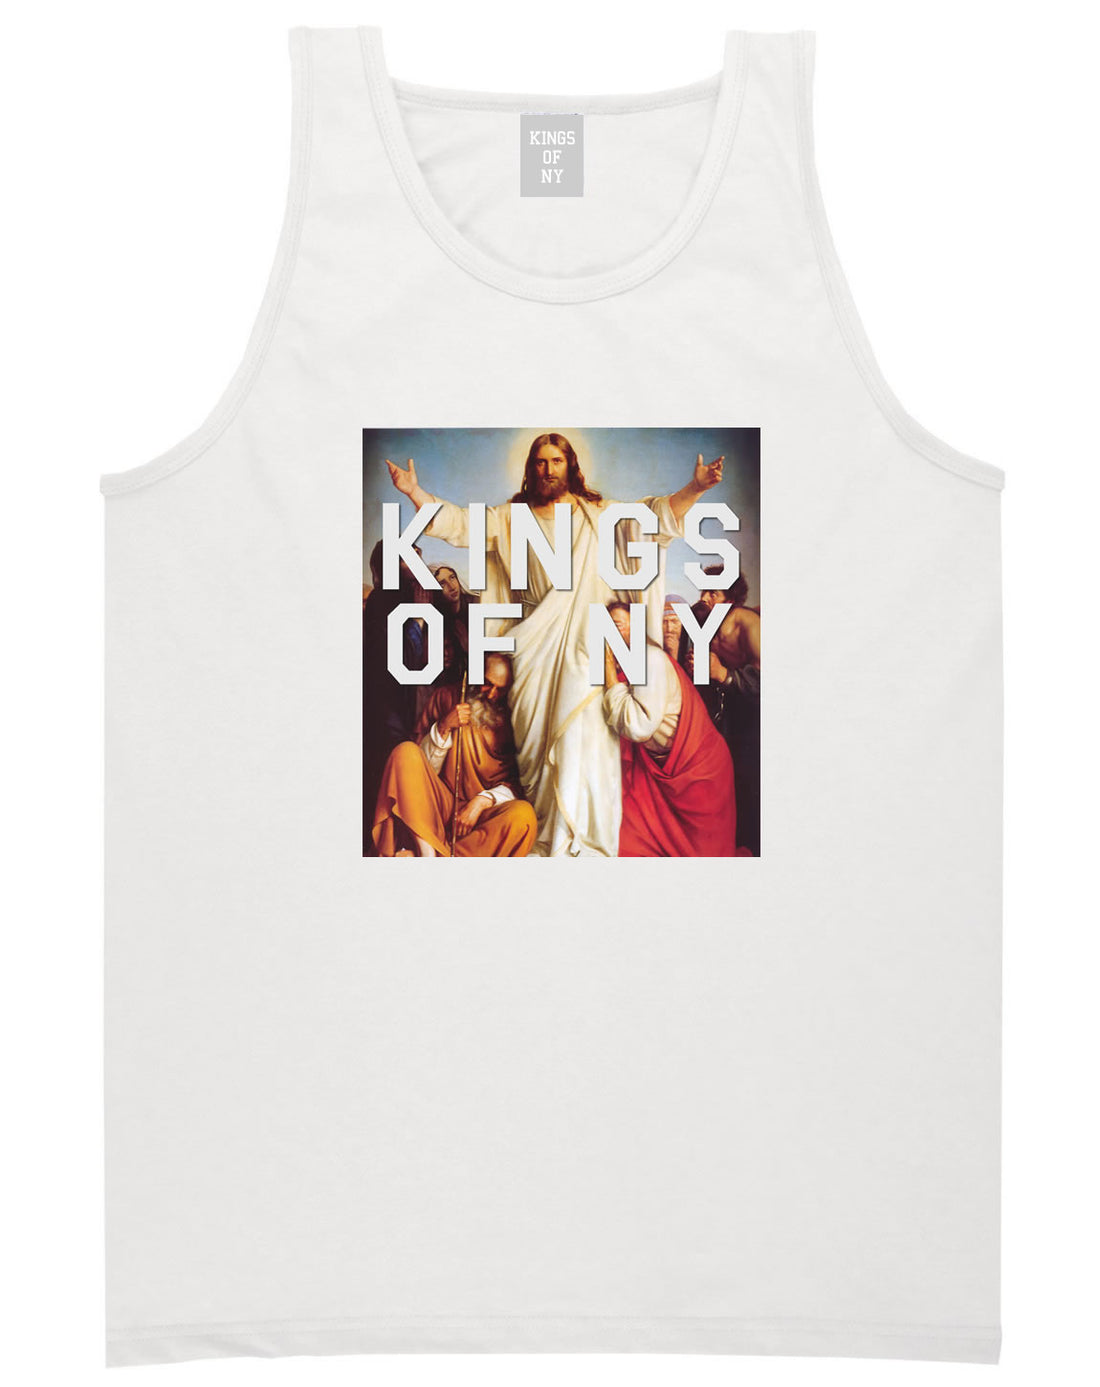 Jesus Worship and Praise of Power Tank Top in White By Kings Of NY